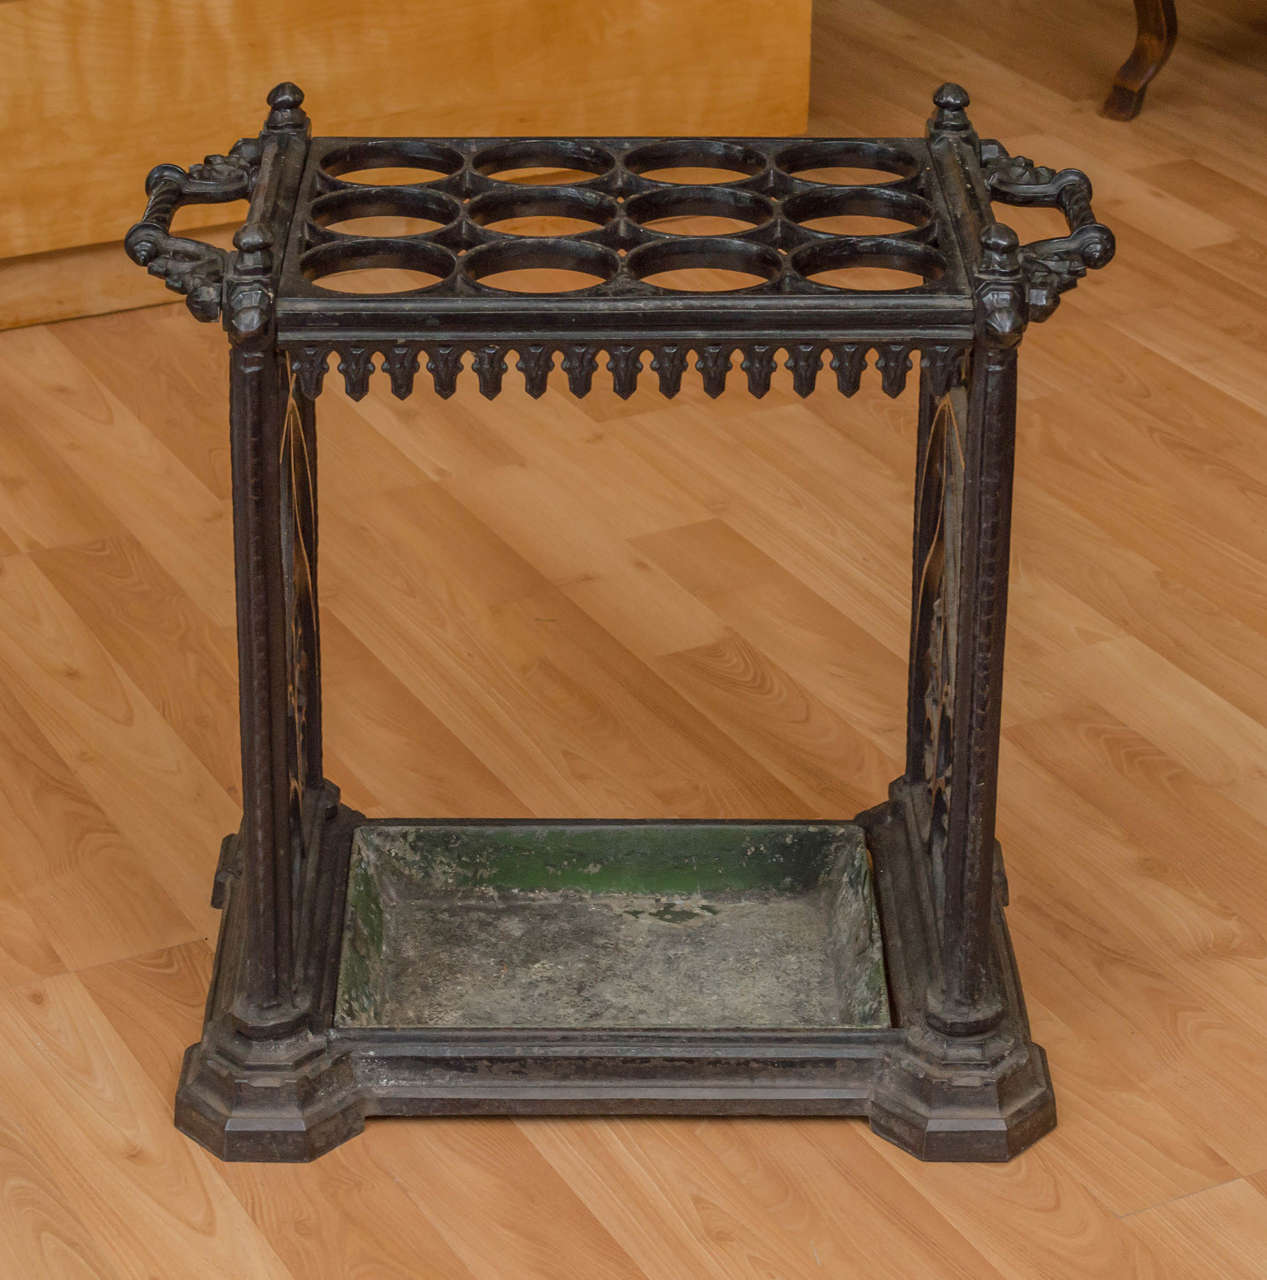 Gothic revival umbrella stand from Victorian England c1860s. Cast Iron with twelve apertures for umbrellas and/or canes/walking sticks. At it's bottom a removable drip tray.